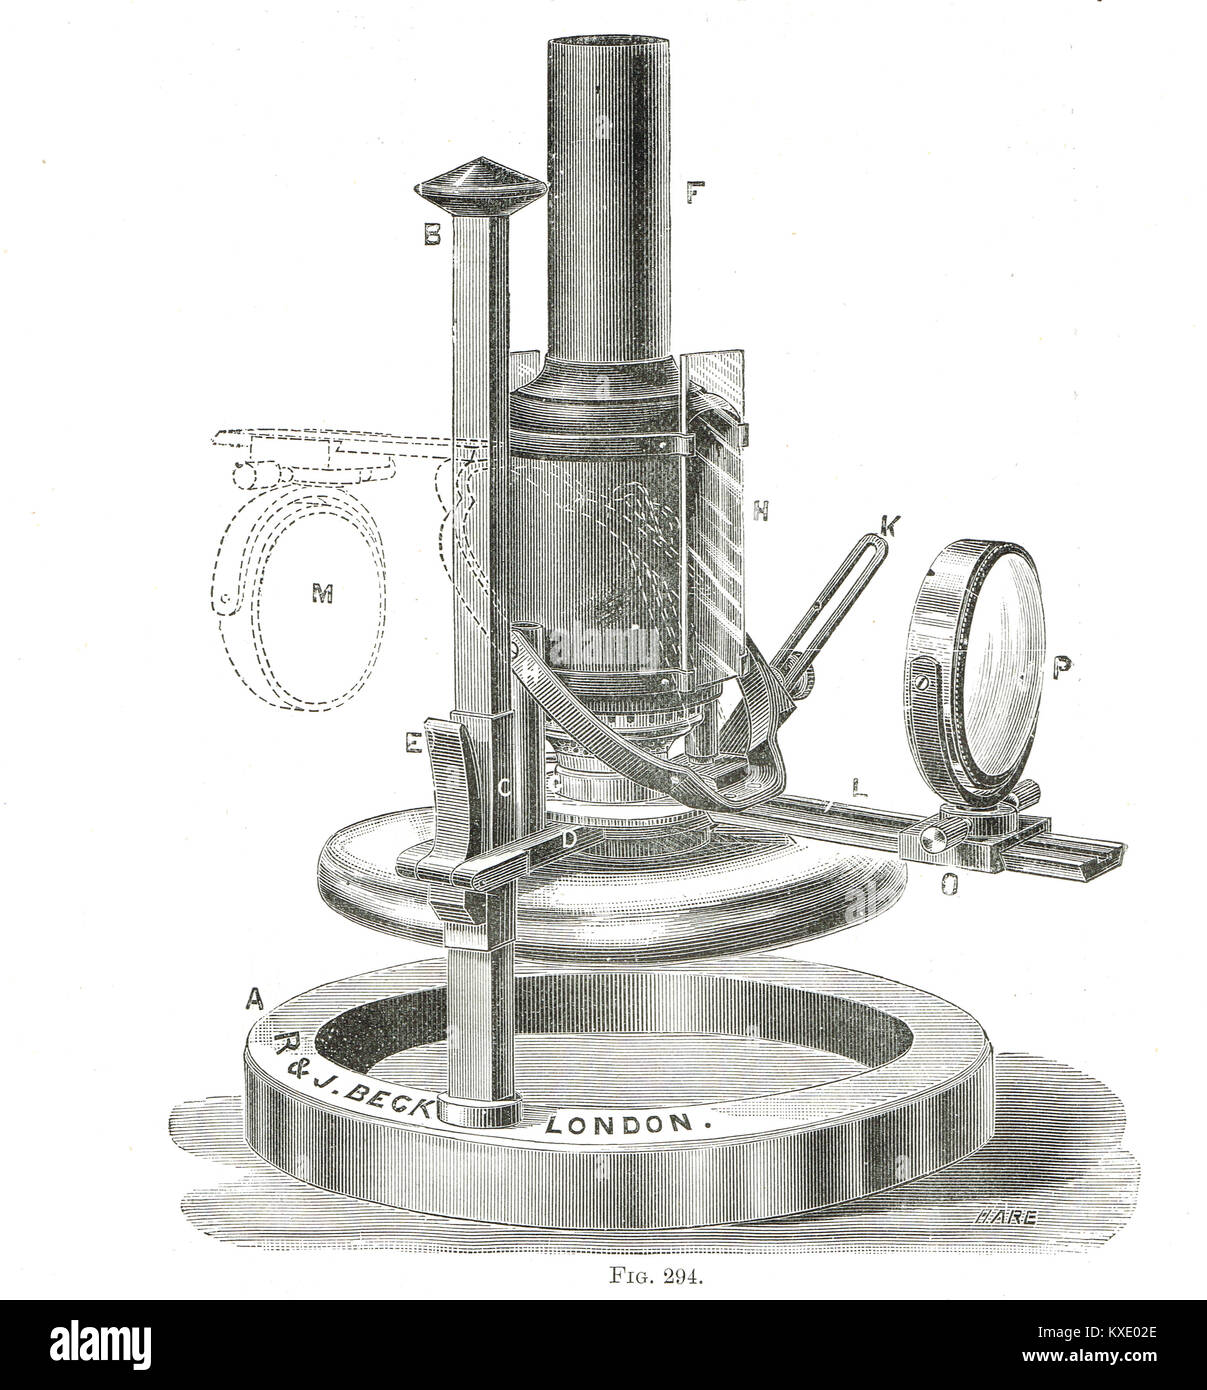 R & J Beck's chimney lampe microscope Banque D'Images